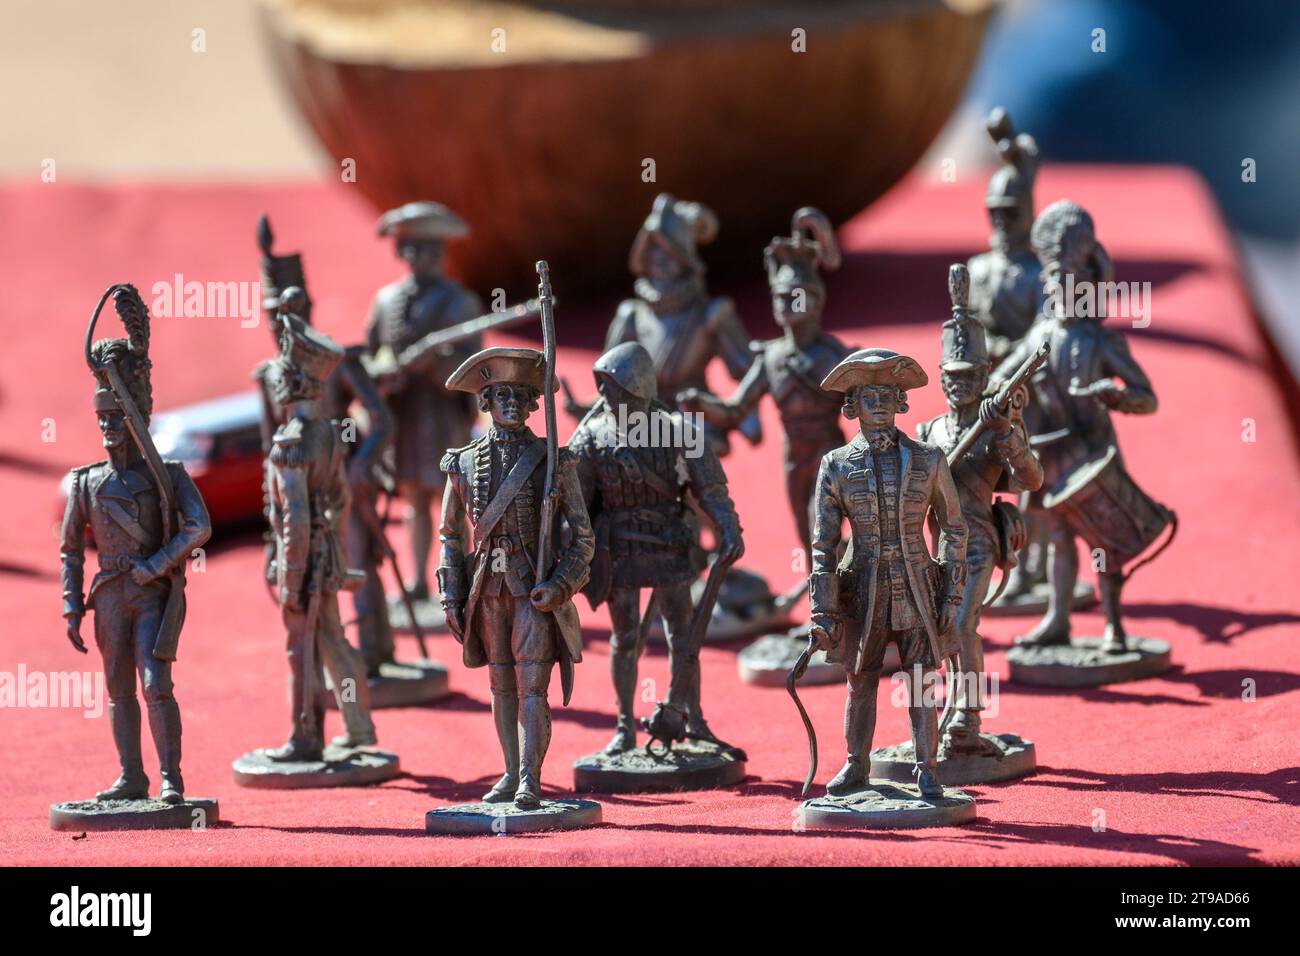 Tin soldiers are miniature figures of toy soldiers that are very popular in the world of collecting. They can be bought finished or in a raw state to Stock Photo